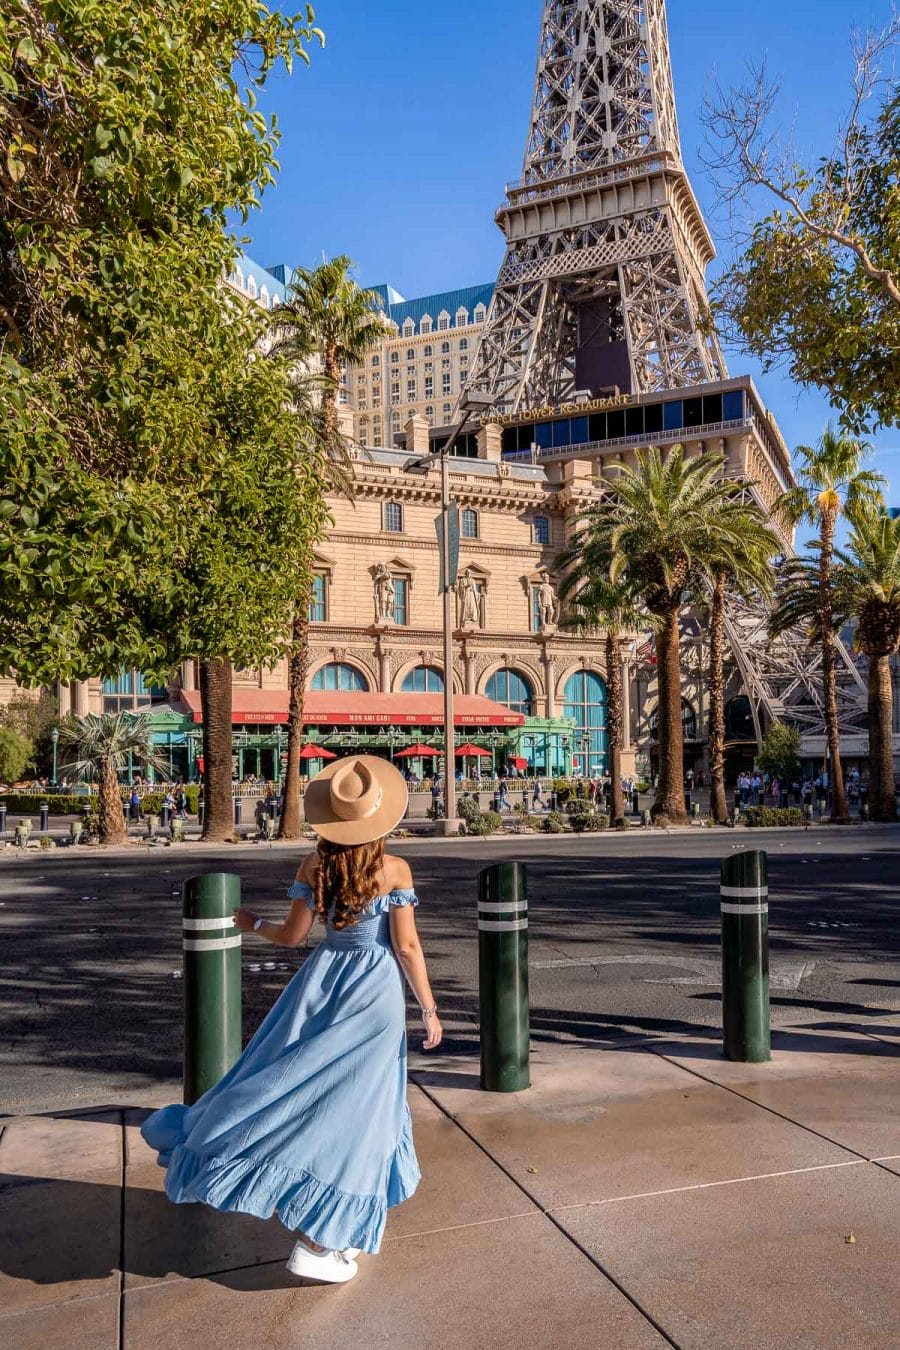 Girl in blue dress in front of the Eiffel Tower at Paris Las Vegas